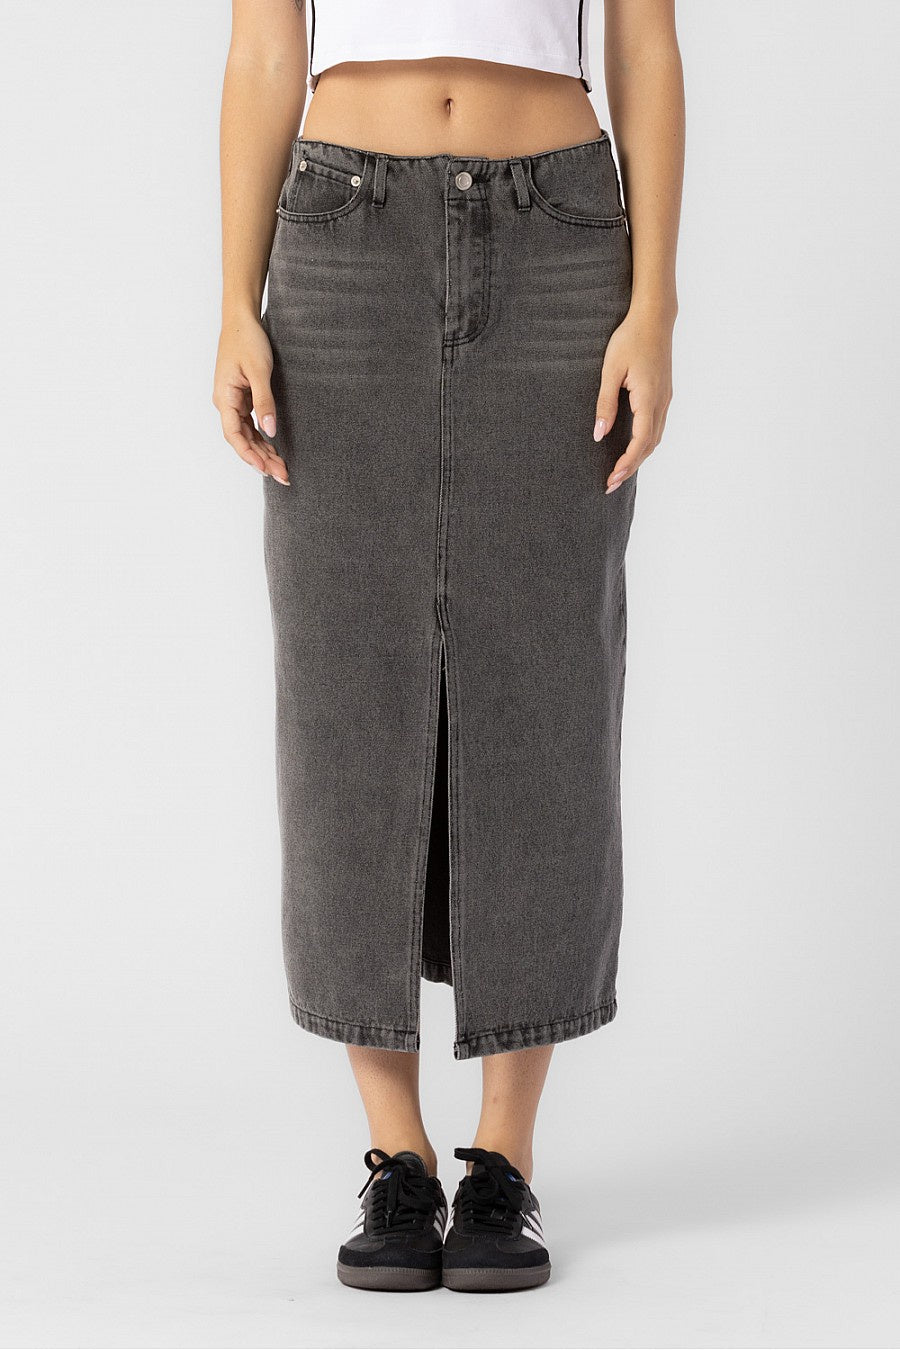 Model is wearing a grey denim midi skirt with front slit.